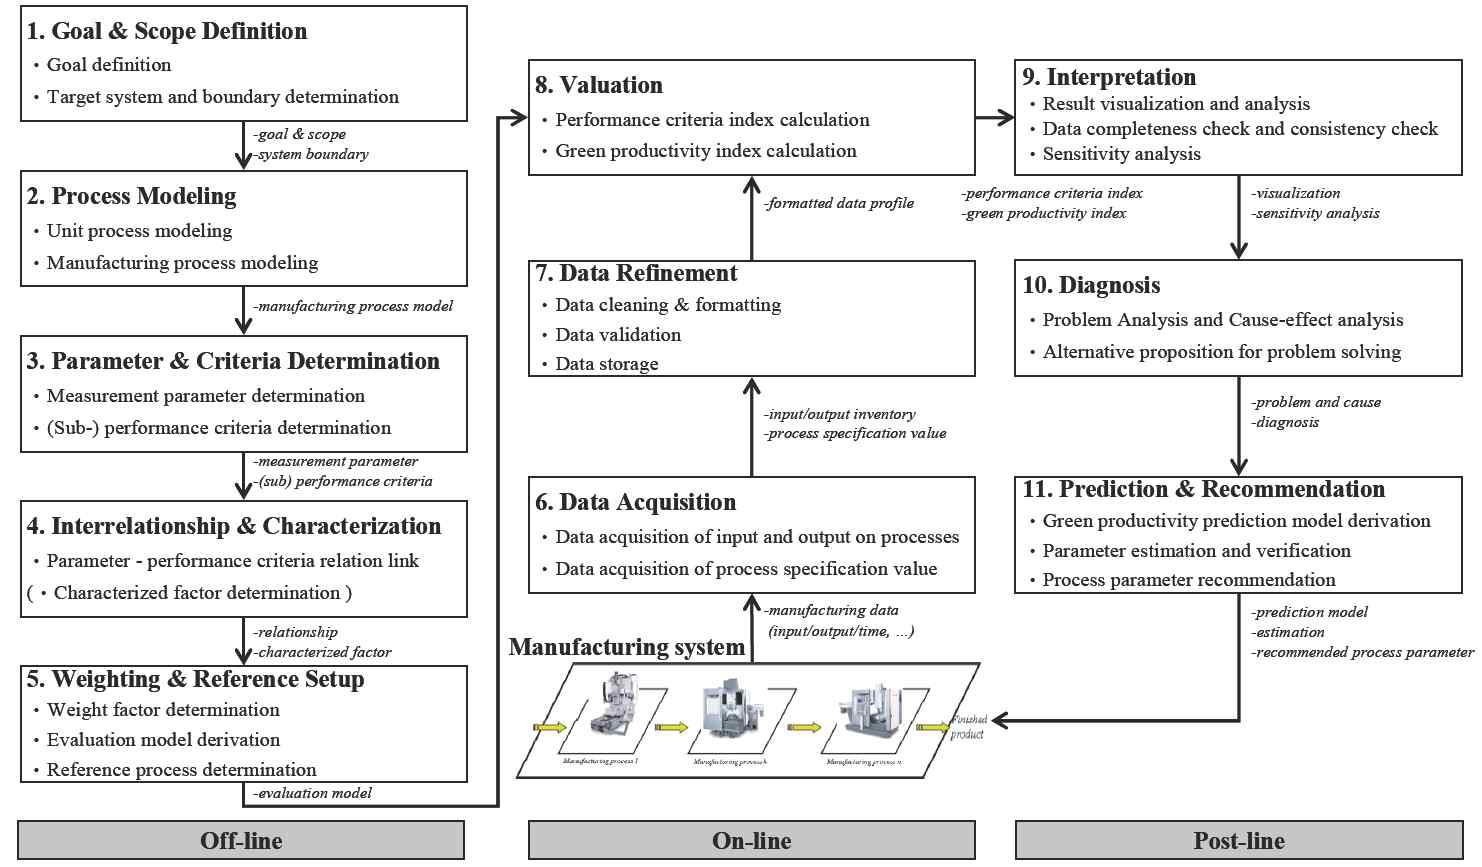 Process for sustainabiilty evaluation process on manufacturing system